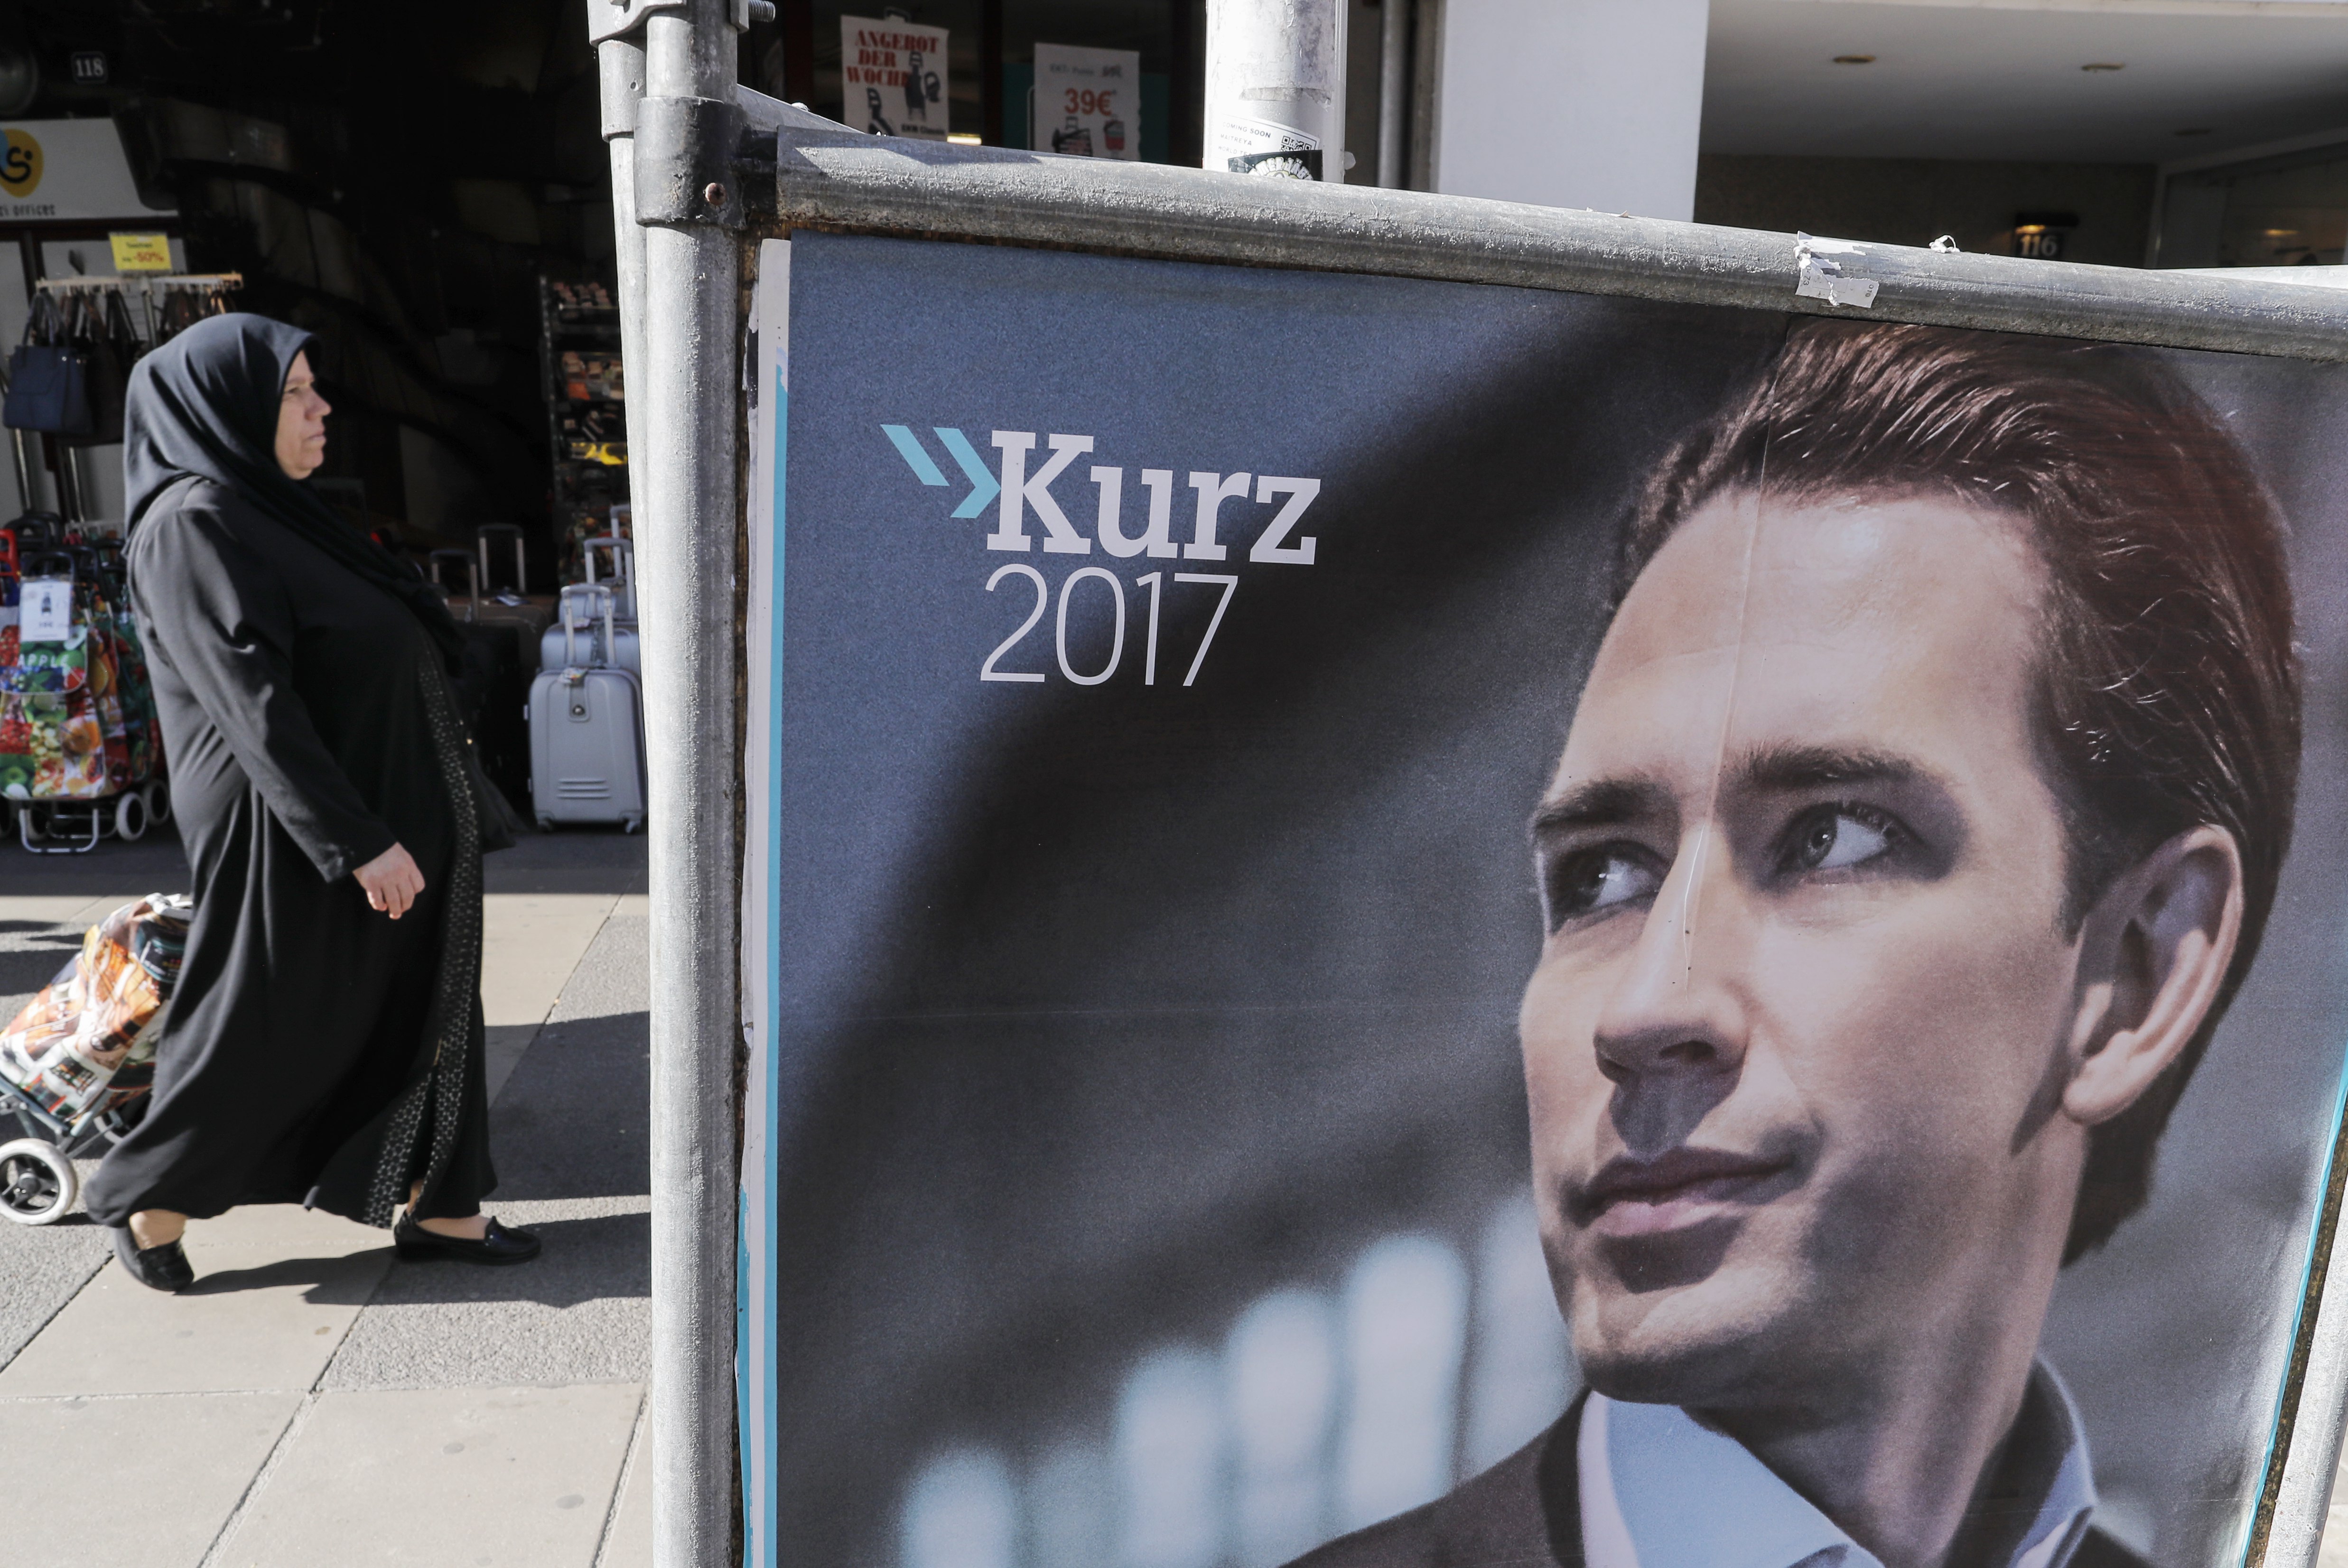 2017-10-14 12:17:47 epa06264888 A veiled woman passes an election poster of Austrian Foreign Minister Sebastian Kurz, the leader and top candidate of the Austrian Peoples Party (OeVP) in Vienna, Austria, 14 October 2017. The Austrian federal elections will take place on 15 October 2017. EPA/VALDRIN XHEMAJ